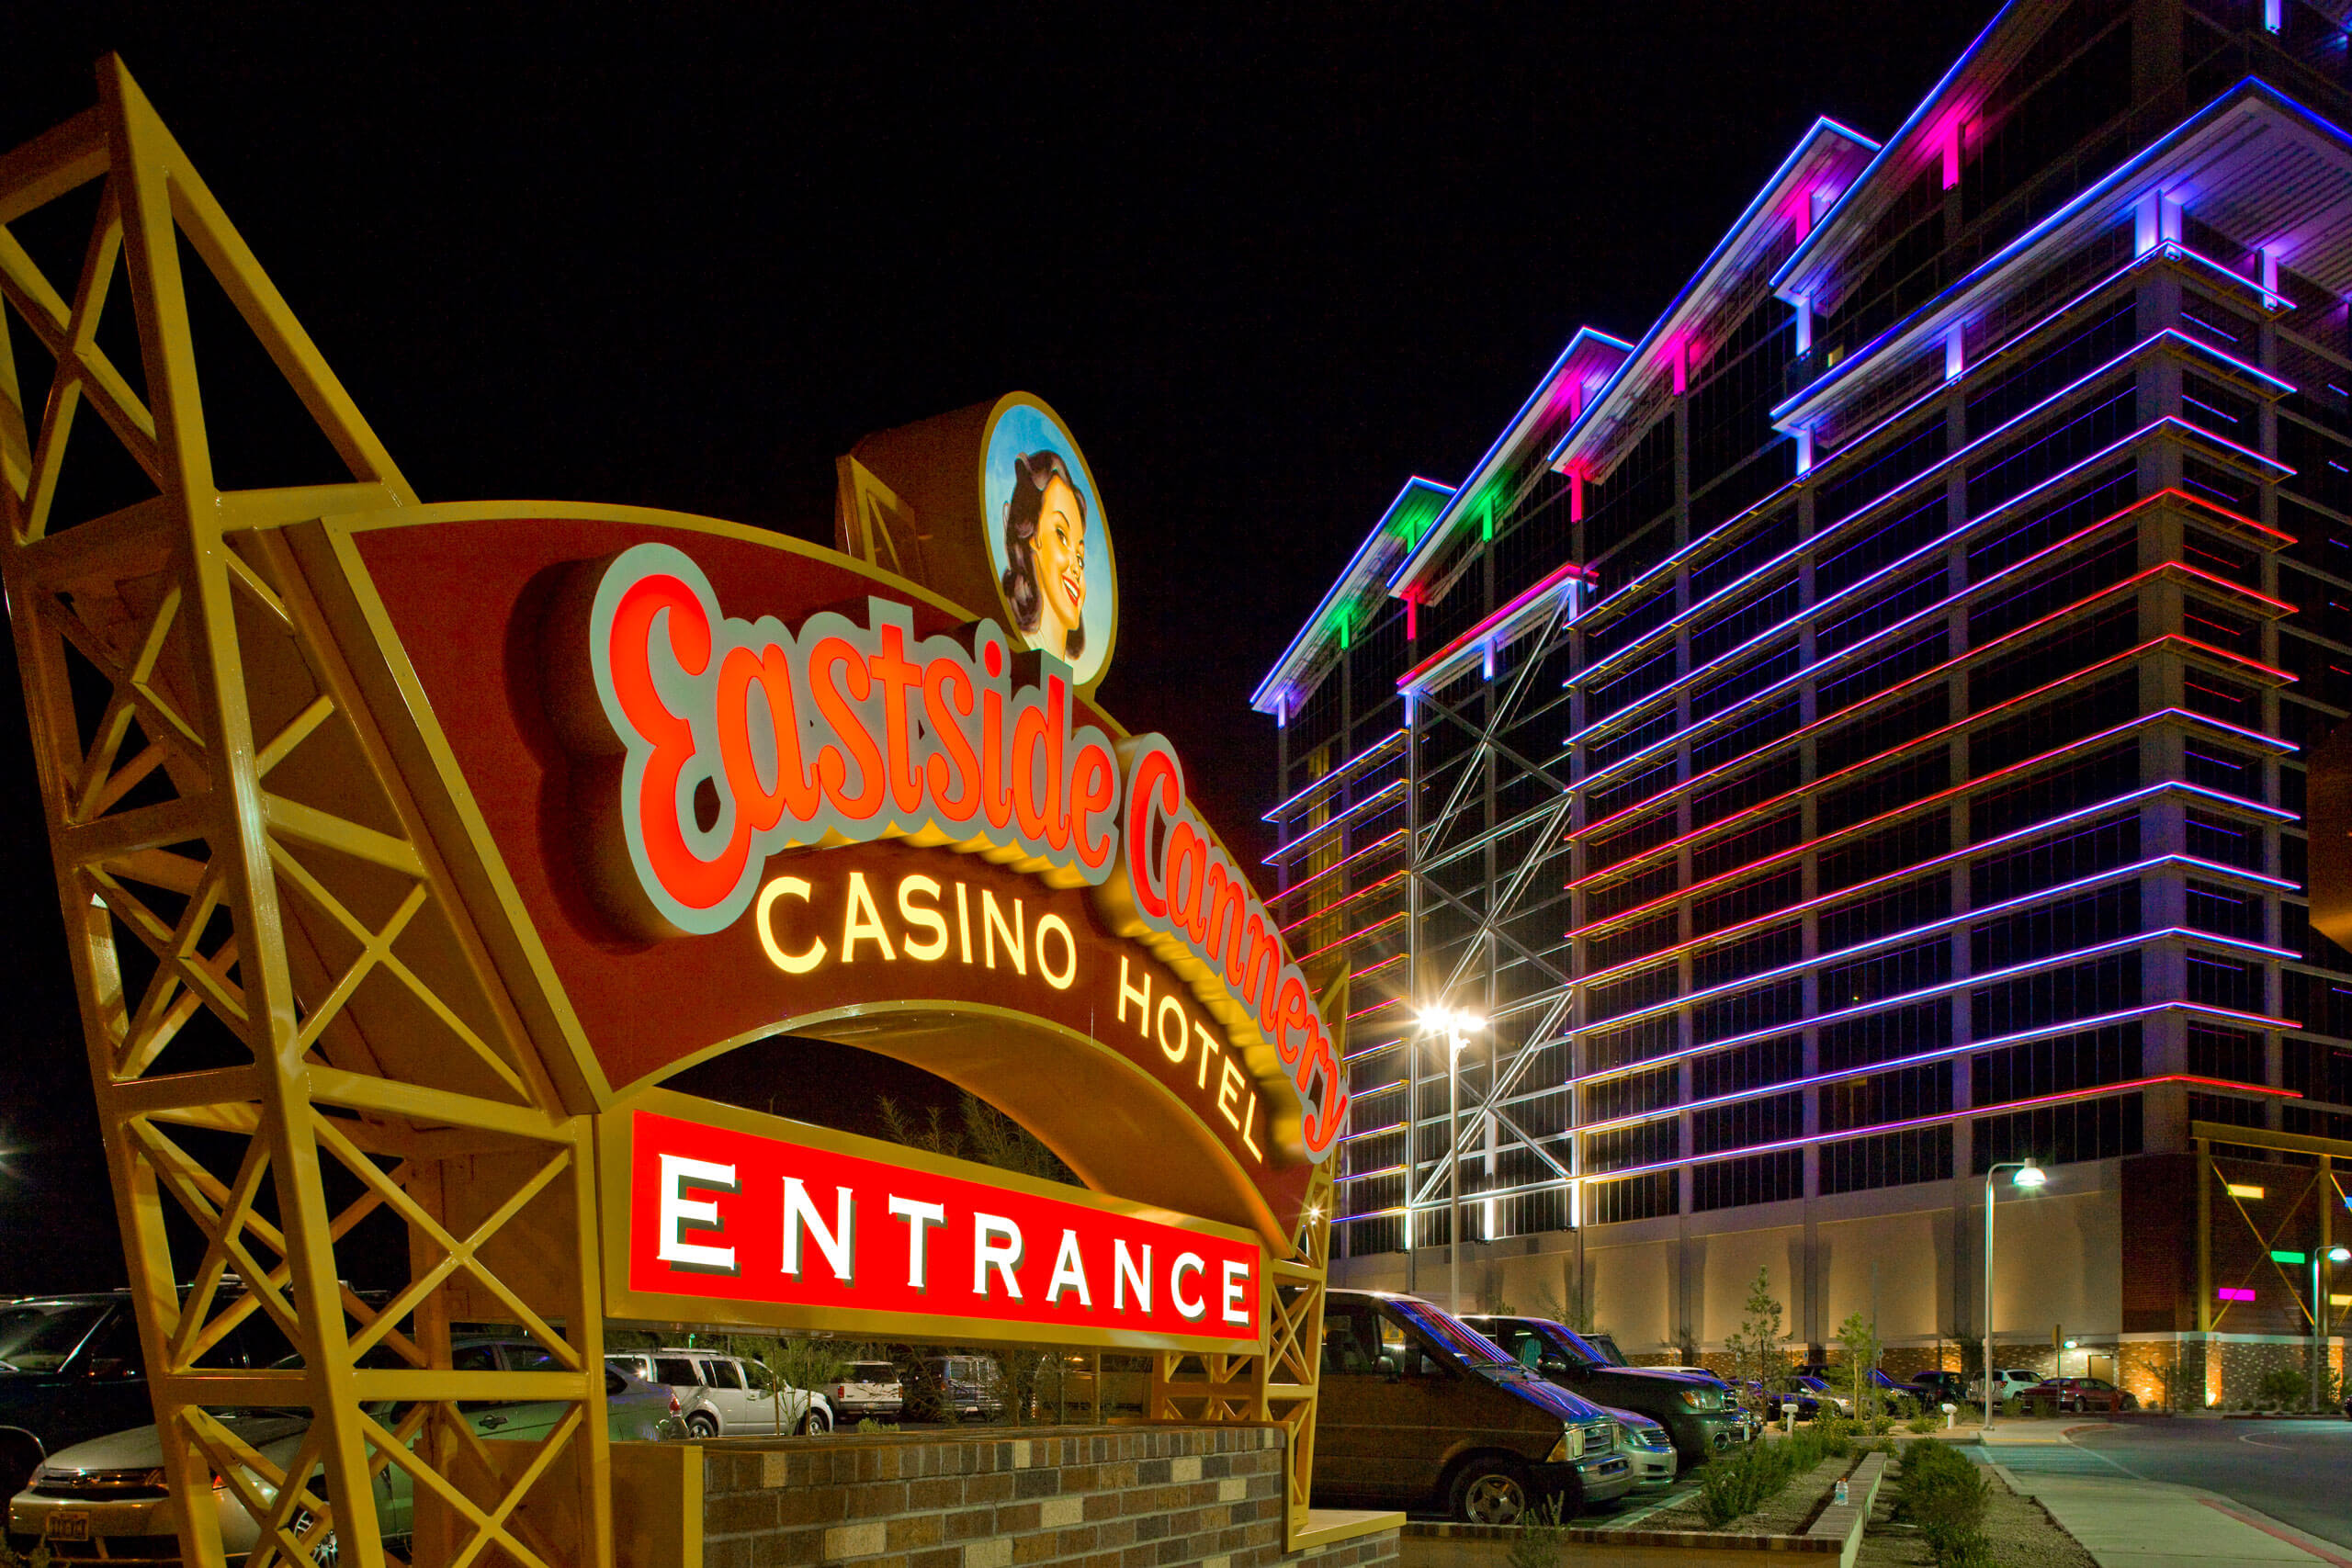 Eastside Cannery entrance at night